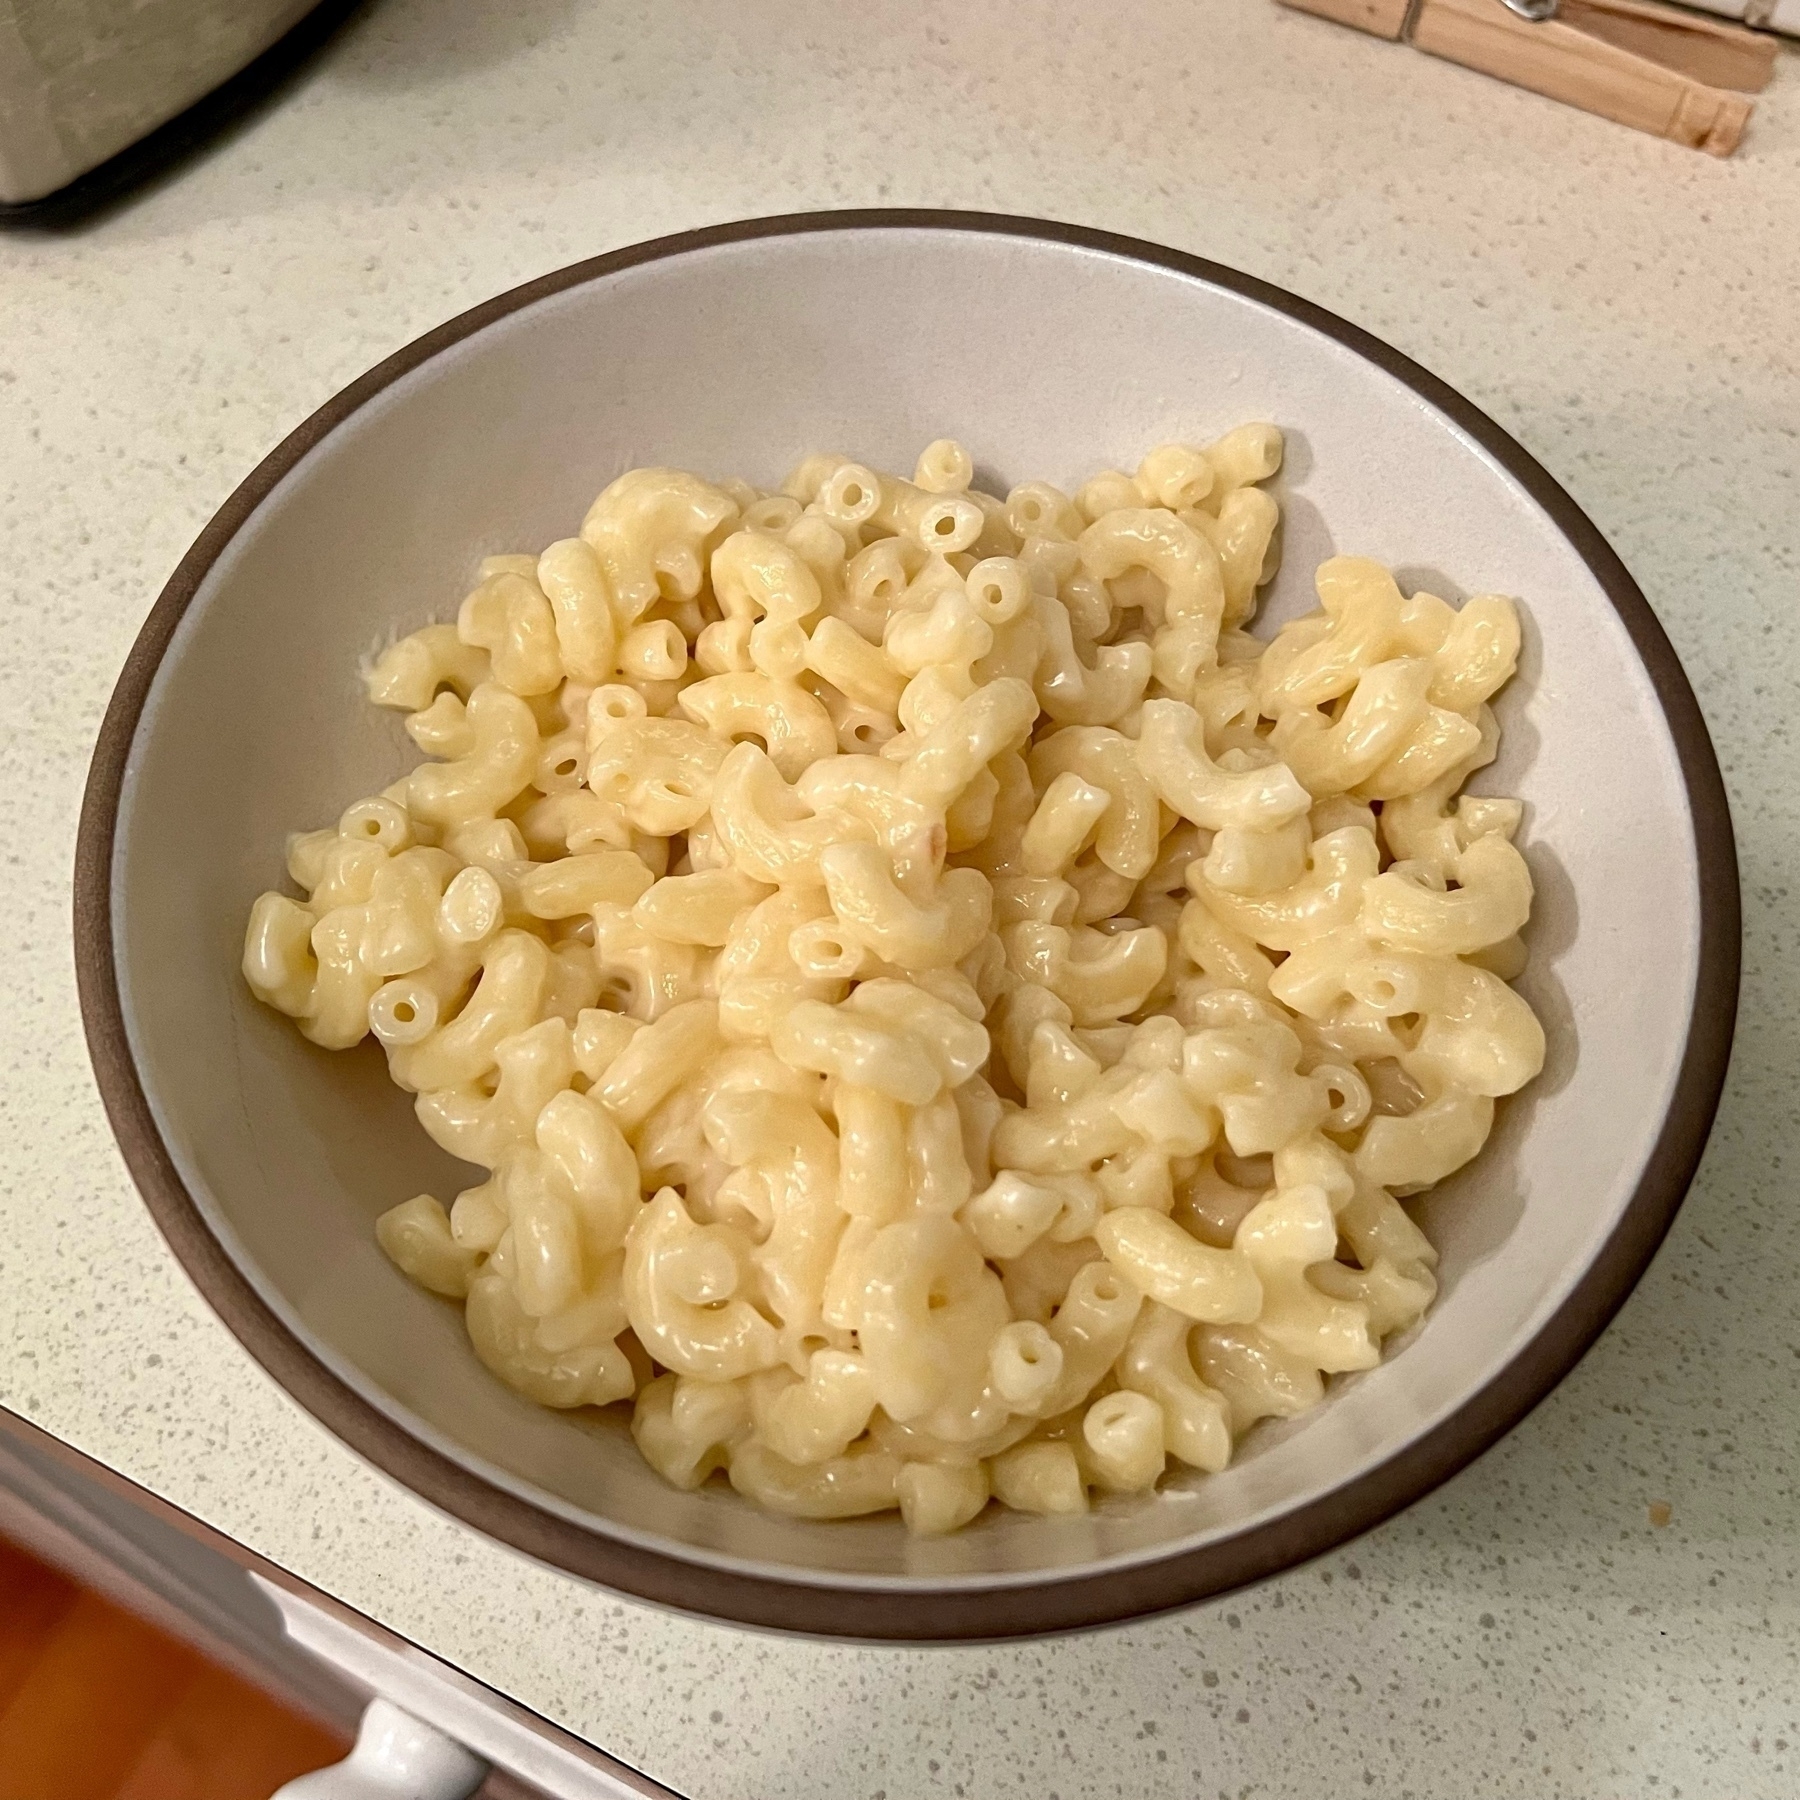 ceramic bowl filled with elbow macaroni pasta coated in white cheese sauce